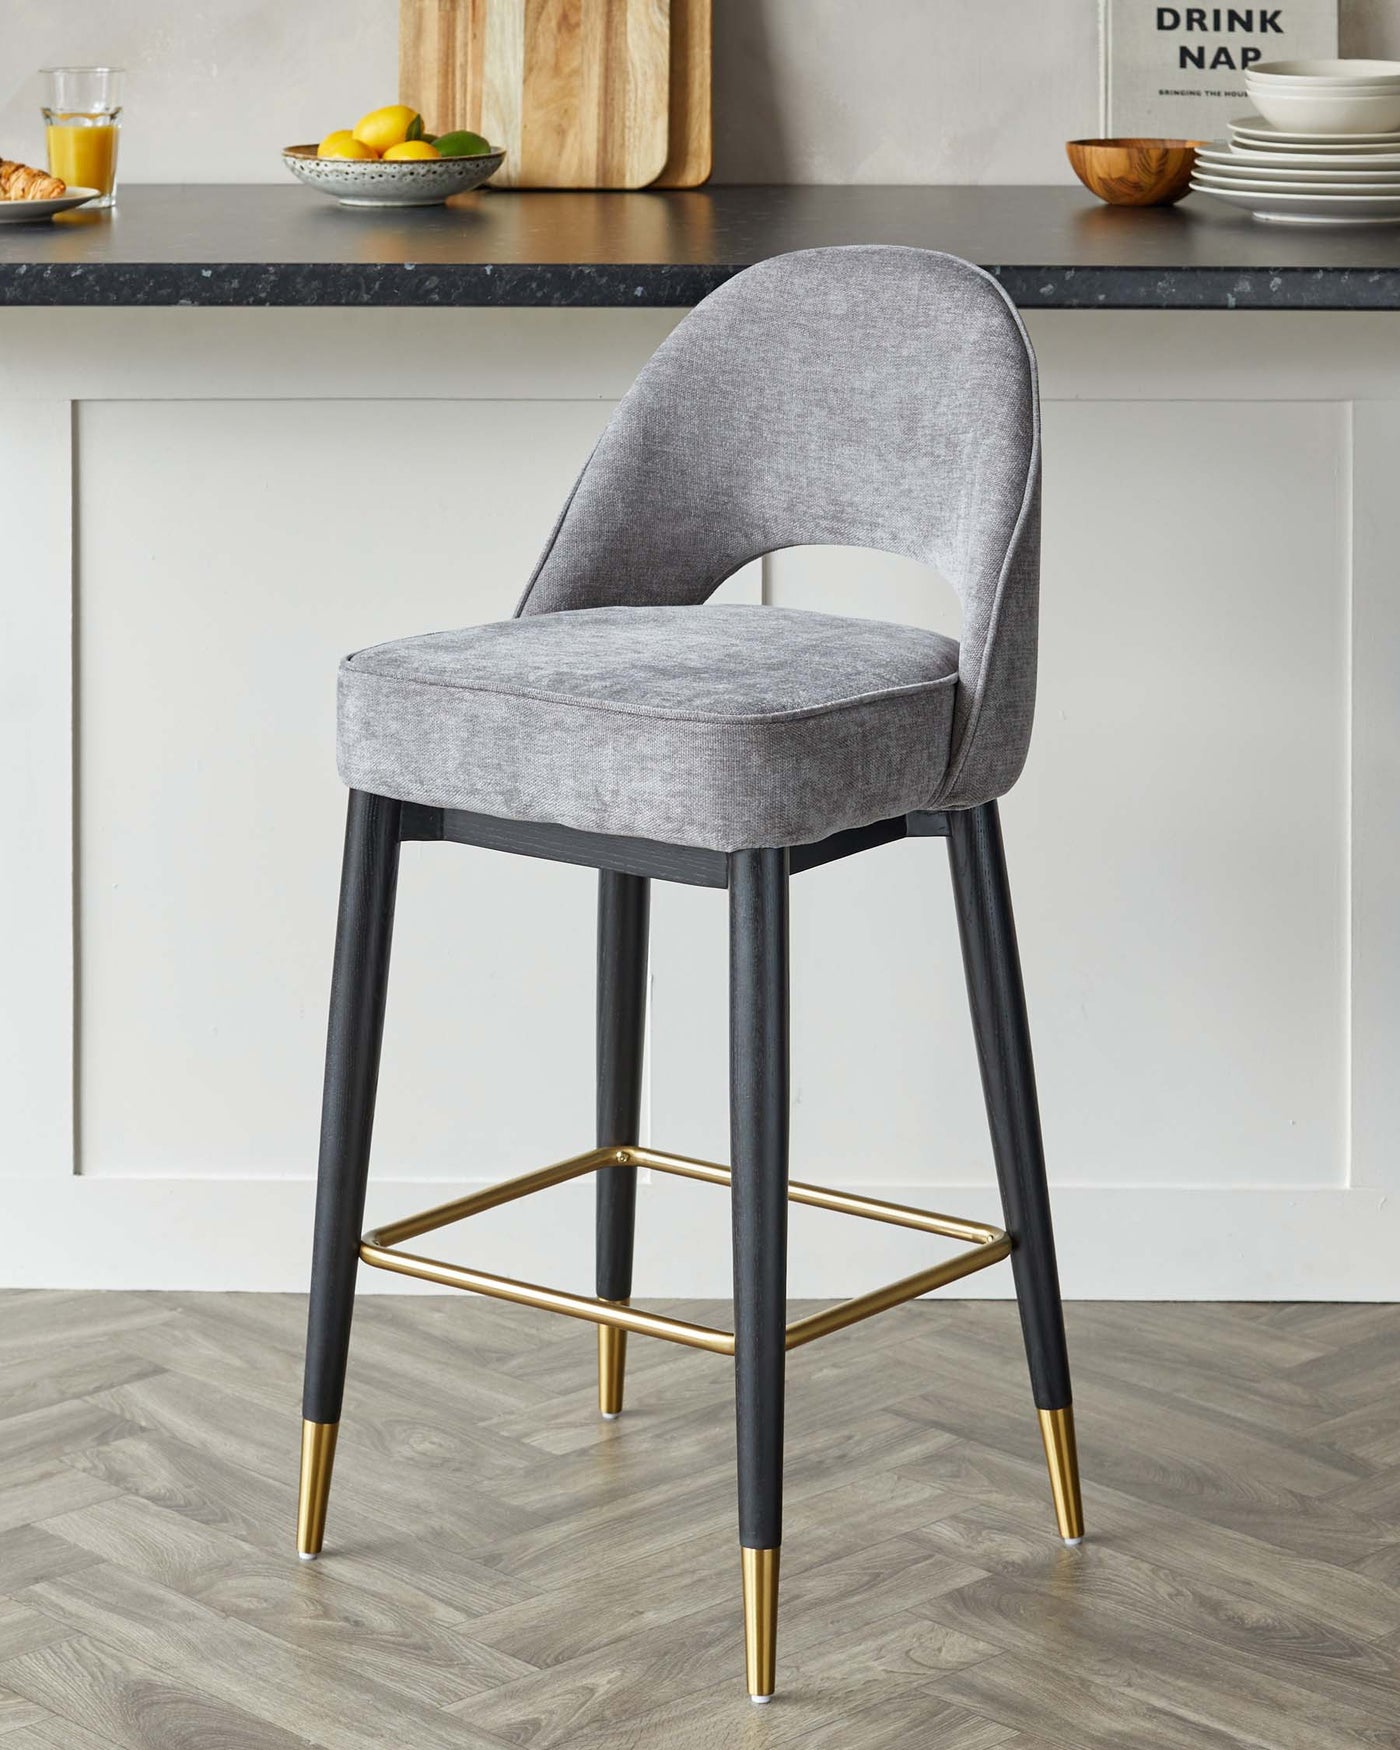 Modern grey upholstered bar stool with a curved backrest and seat on four black legs, accented with a gold footrest and gold-tipped legs, set against a kitchen counter backdrop.